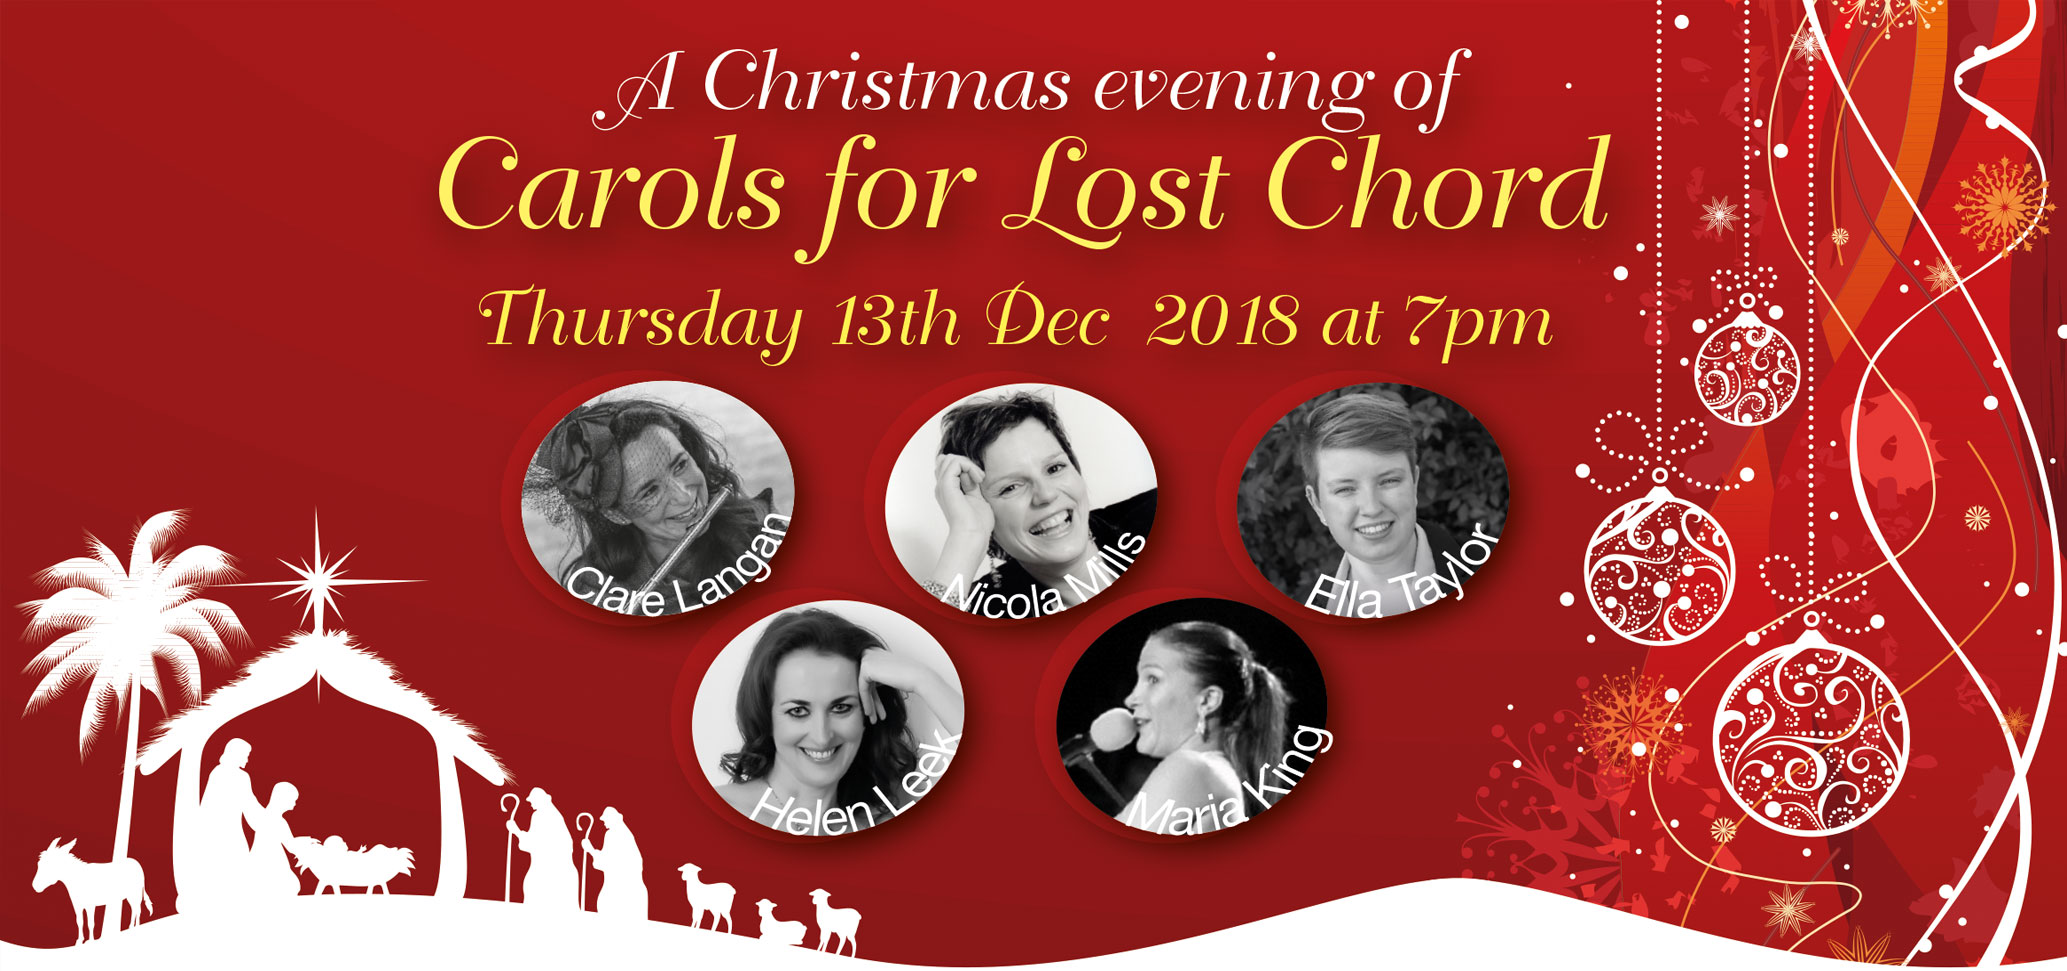 A Christmas evening of Carols 2018 for Lost Chord